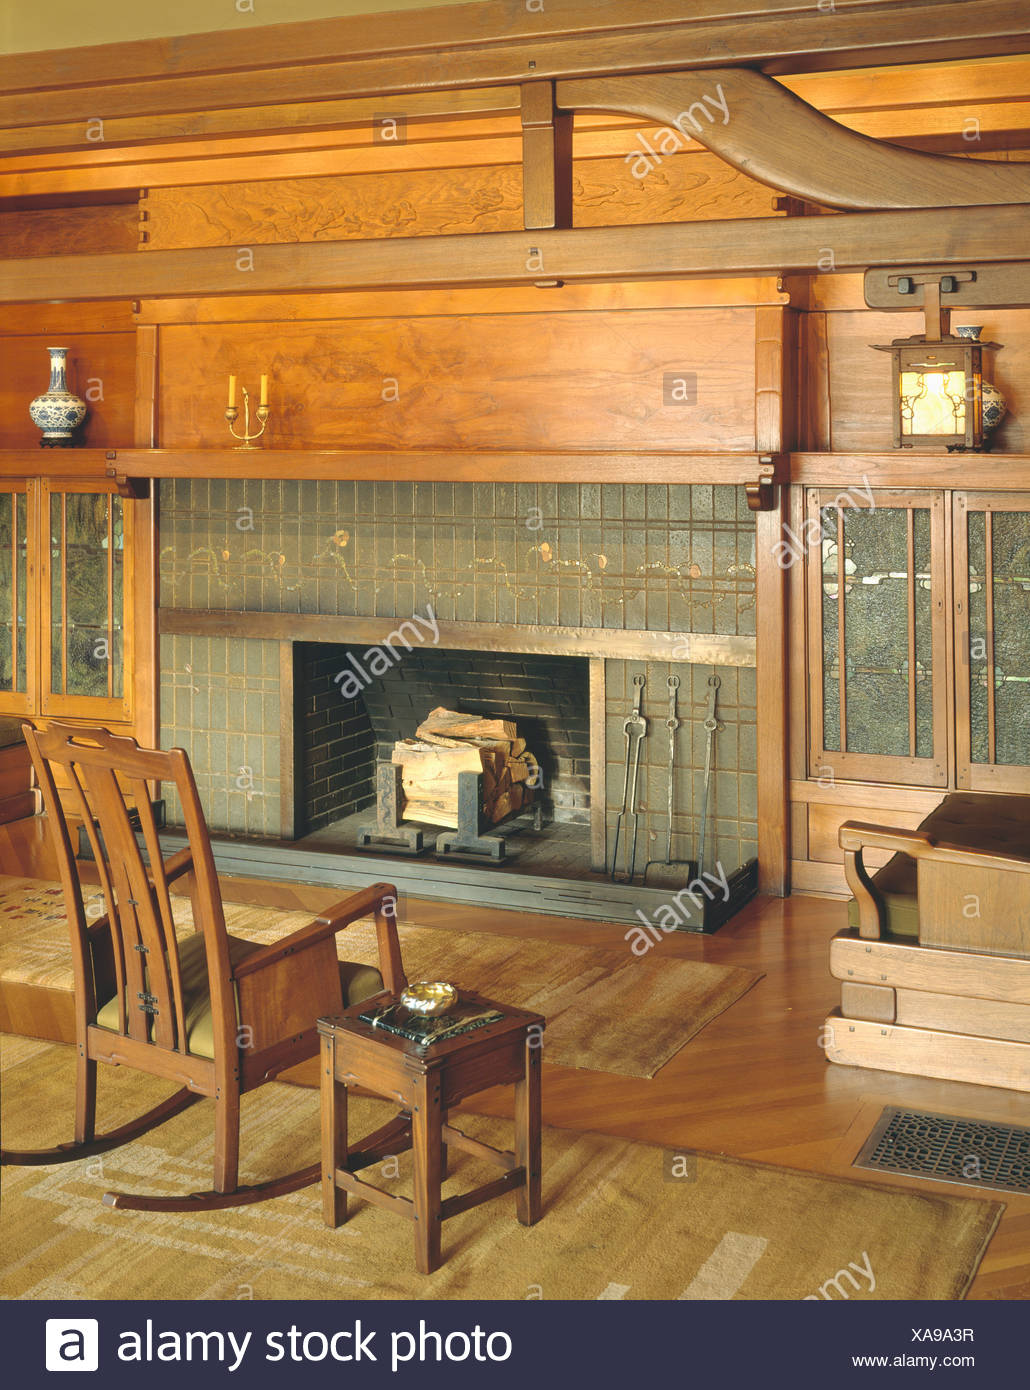 wooden table and rocking chair in front of fireplace in the